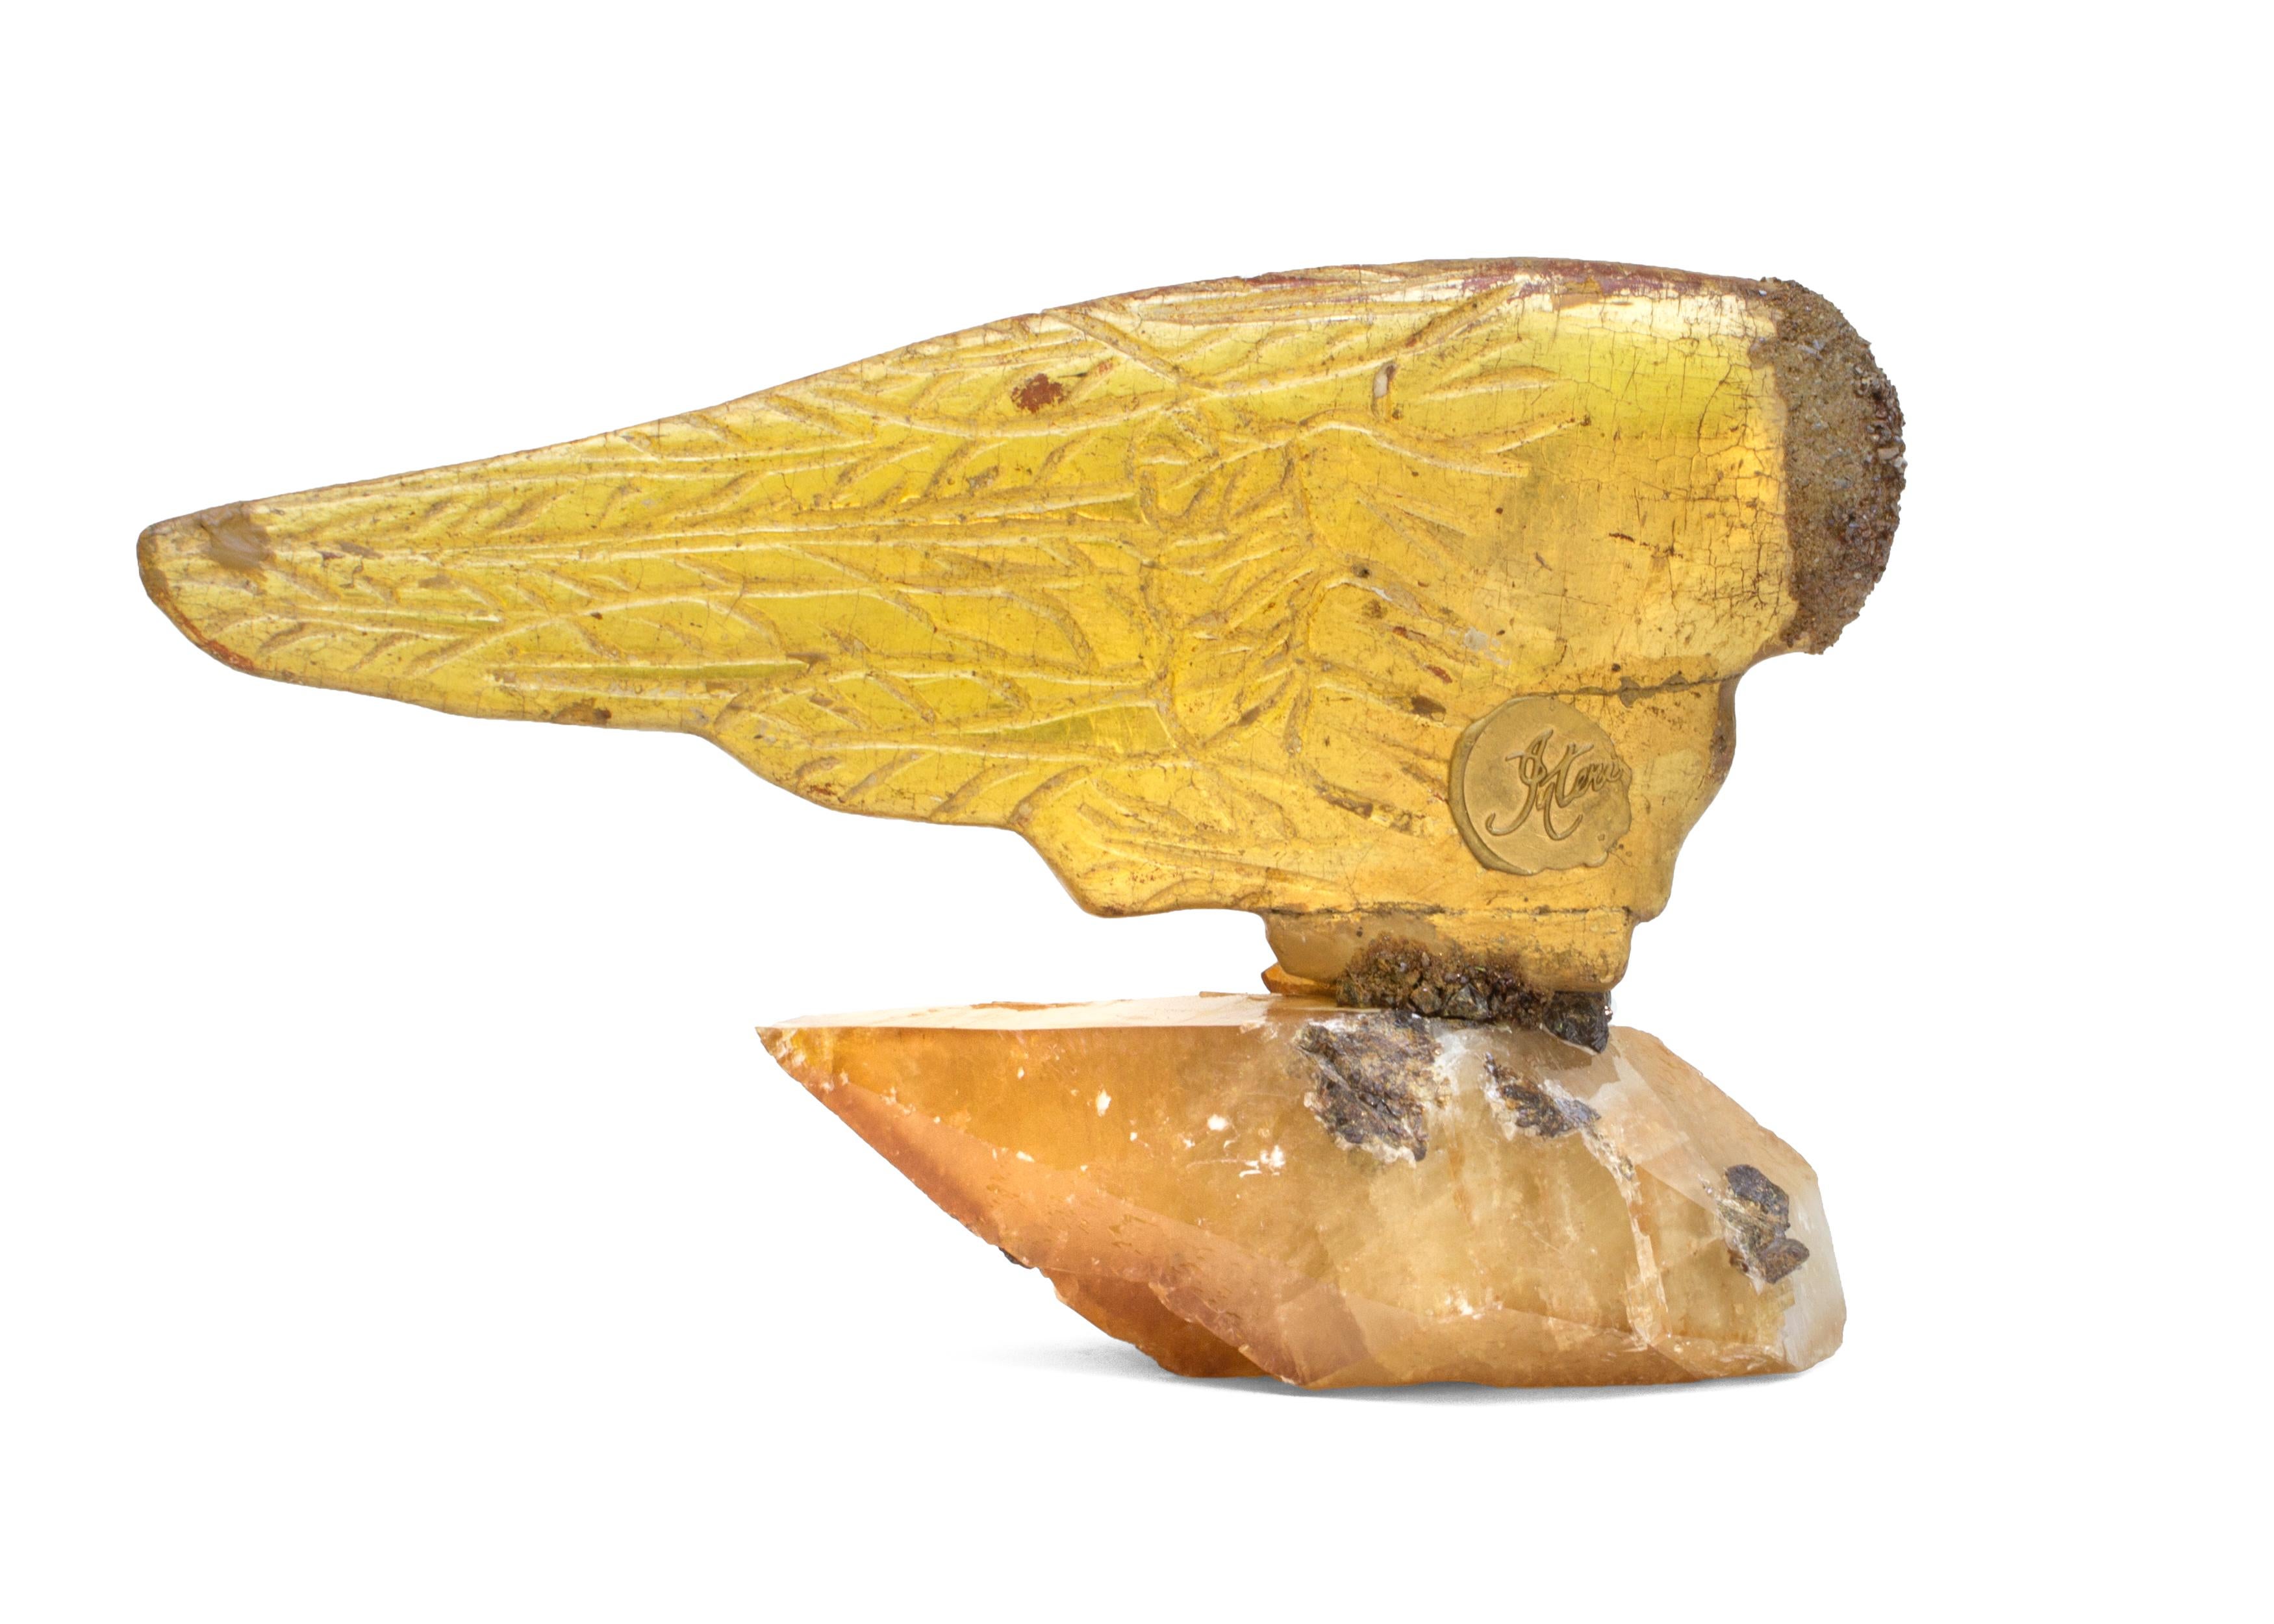 Pair of 18th Century Italian Angel Wings on Calcite Crystals with Sphalerite 1